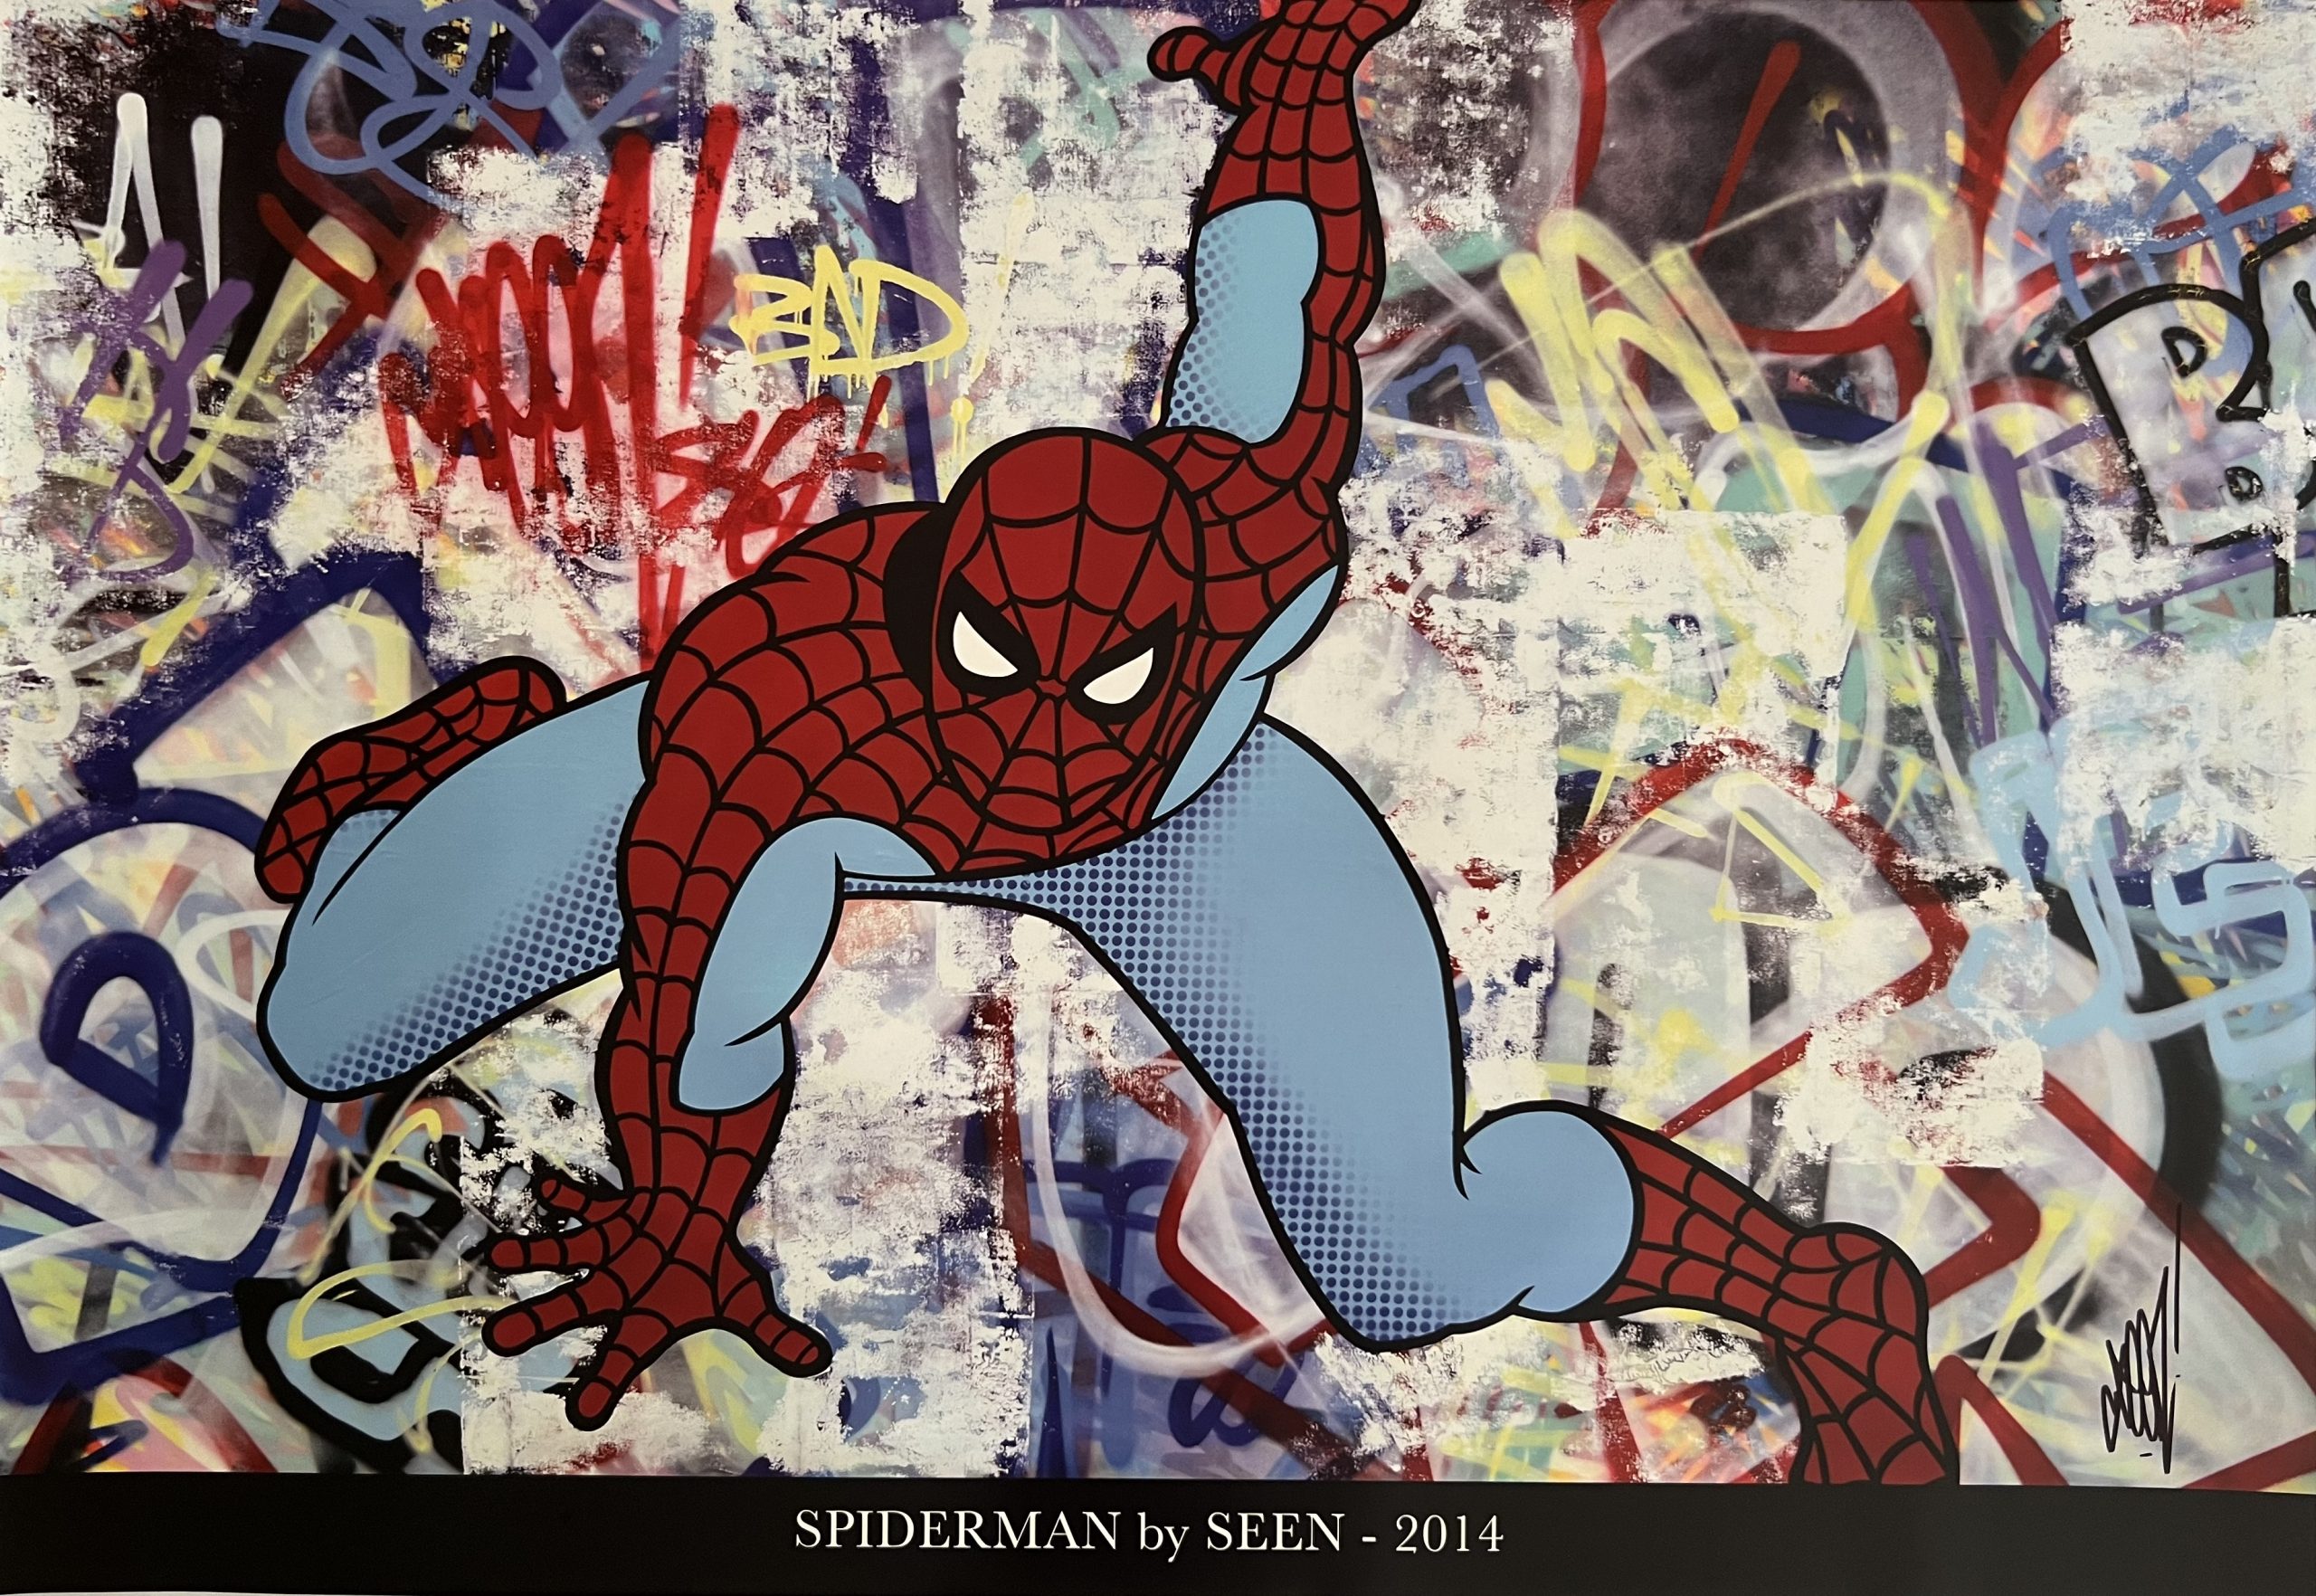 Spiderman signed poster by seen